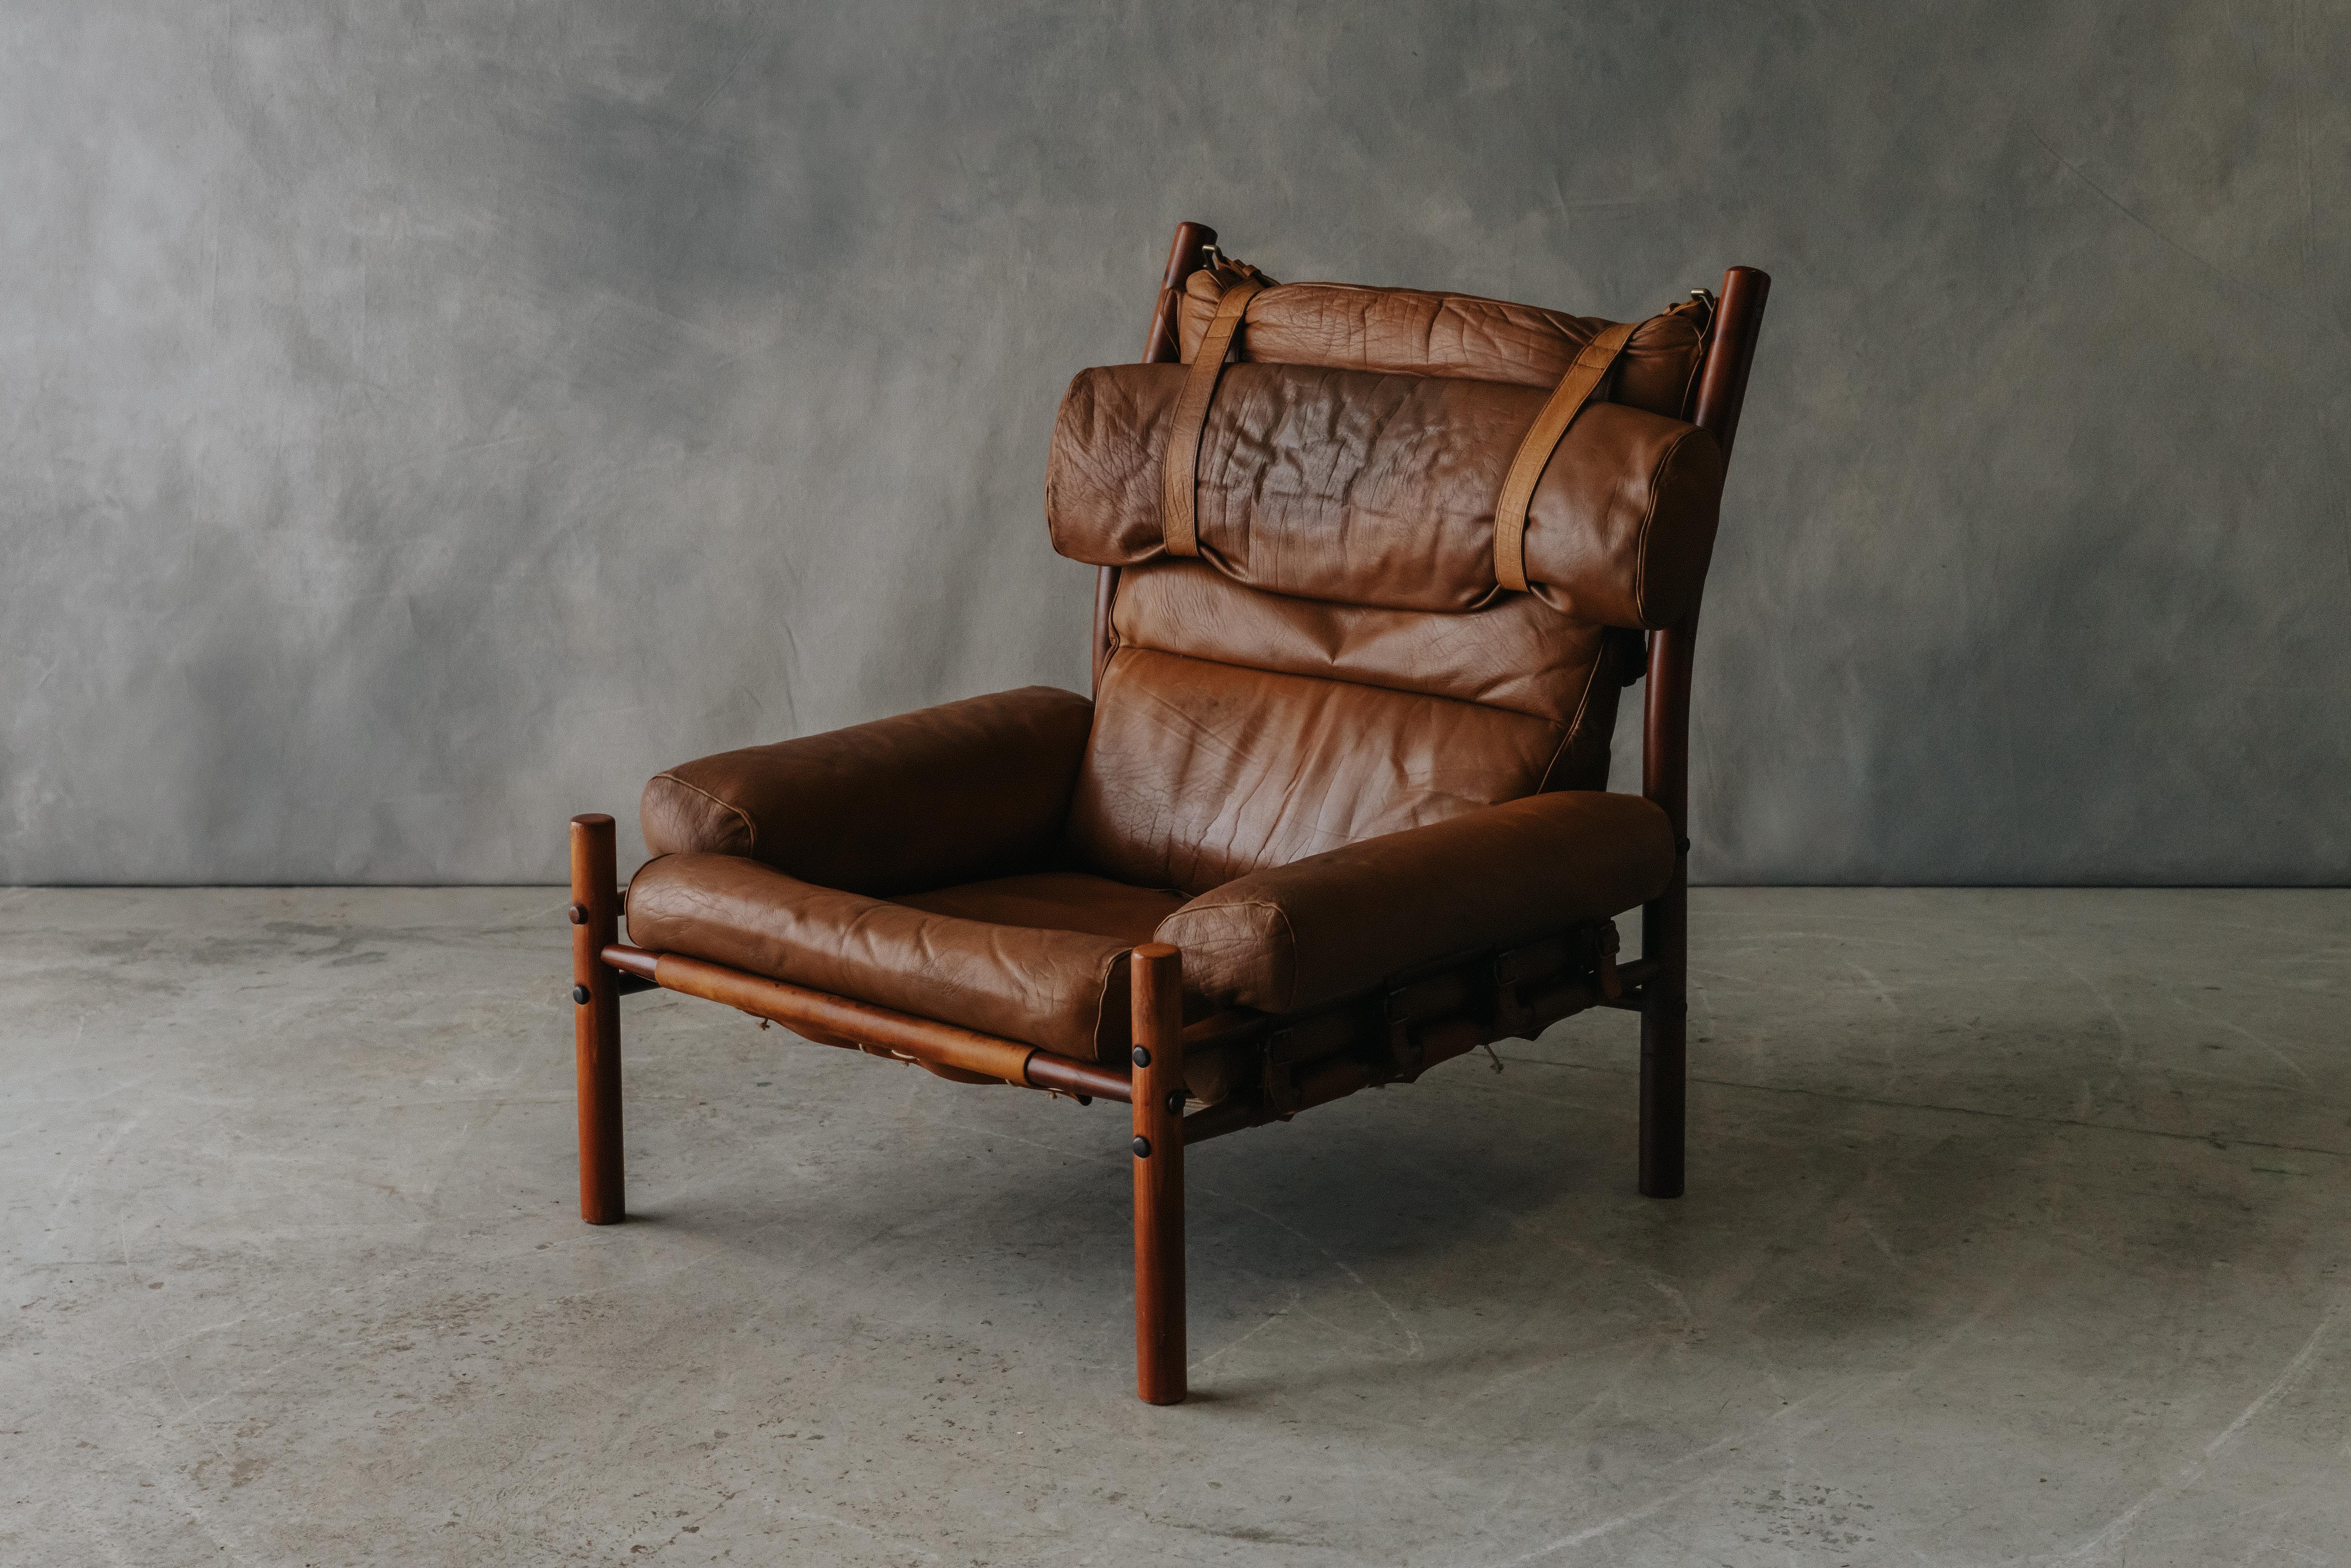 Vintage Arne Norell Lounge Chair, Model Inca, From Sweden, Circa 1970.  Solid beech frame with original brown leather upholstery.  Great wear and patina.